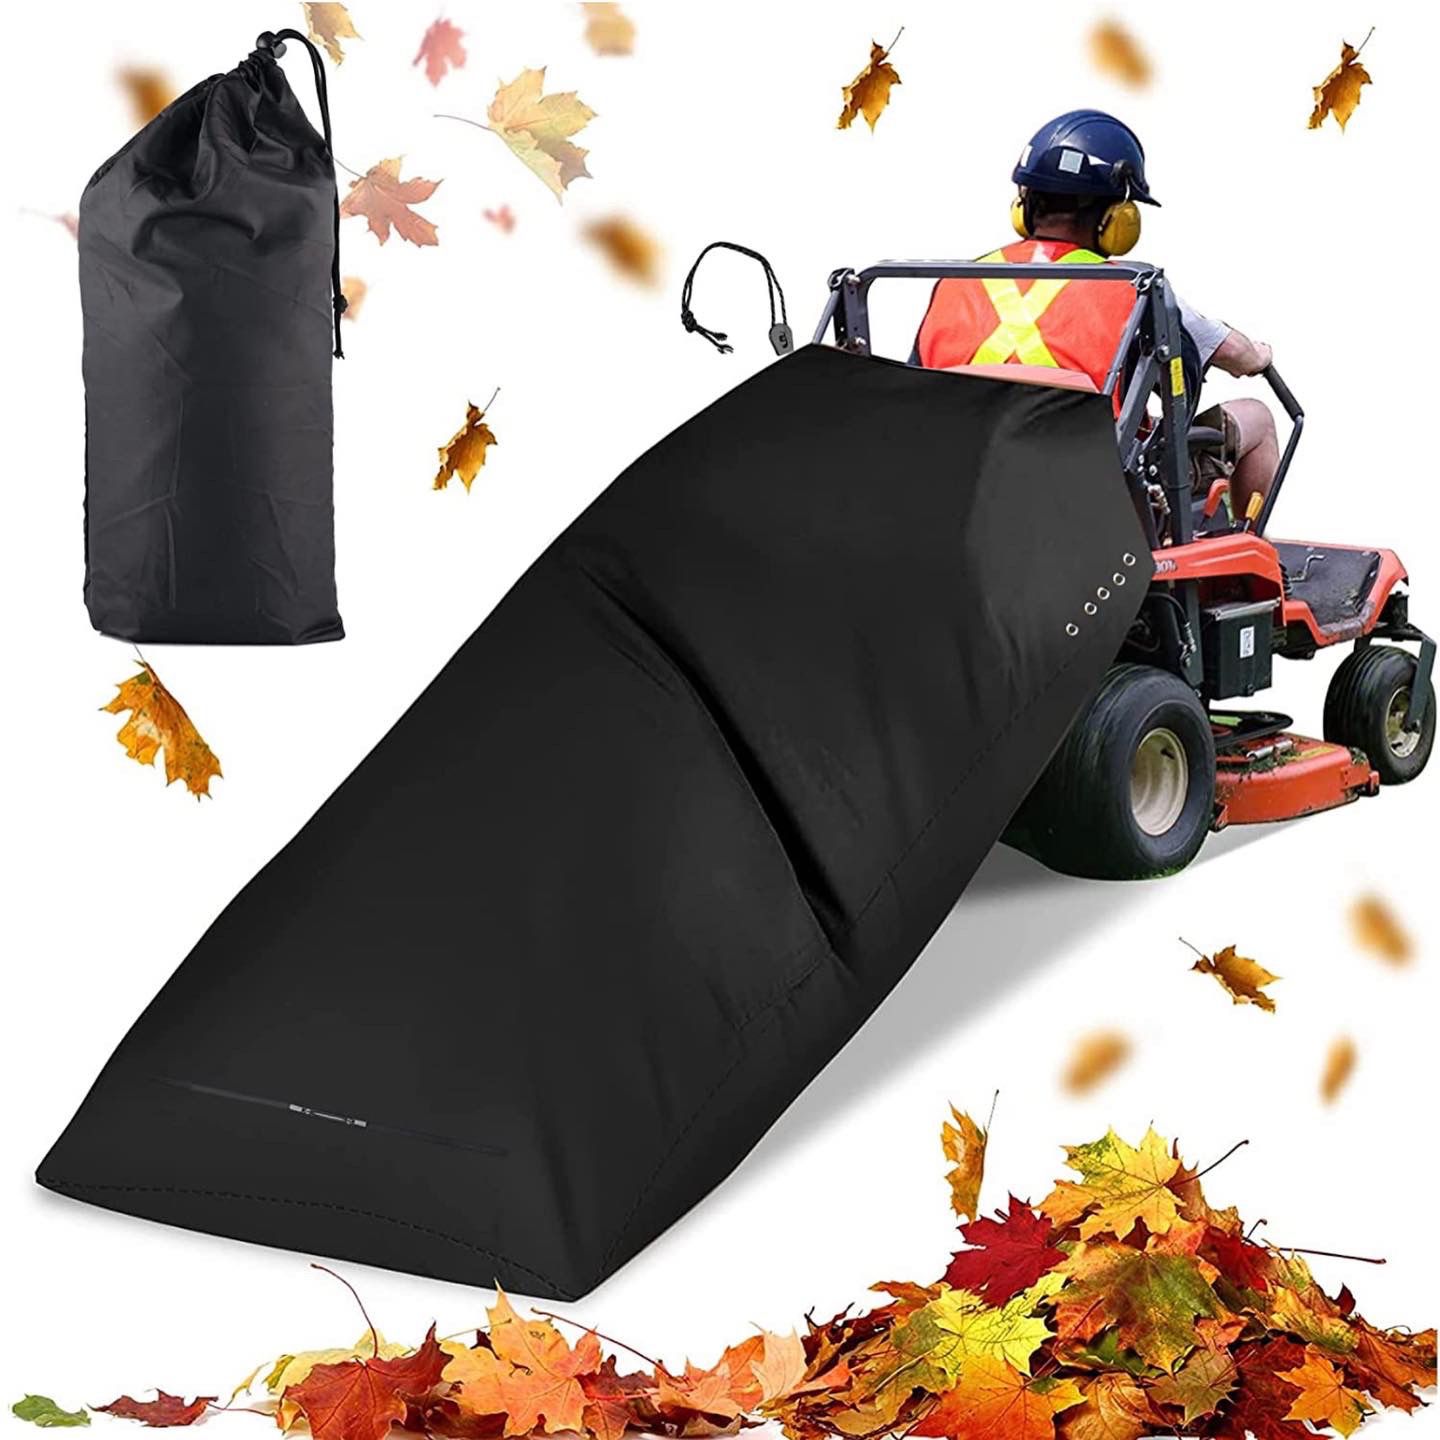 Tqehs Latest Upgrade Leaf Bag for Lawn Tractor with Vent Holes and Bottom Zipper, 54 Cubic Feet 420D Opening Garden Lawn Mower Leaf Bags for Garden Le